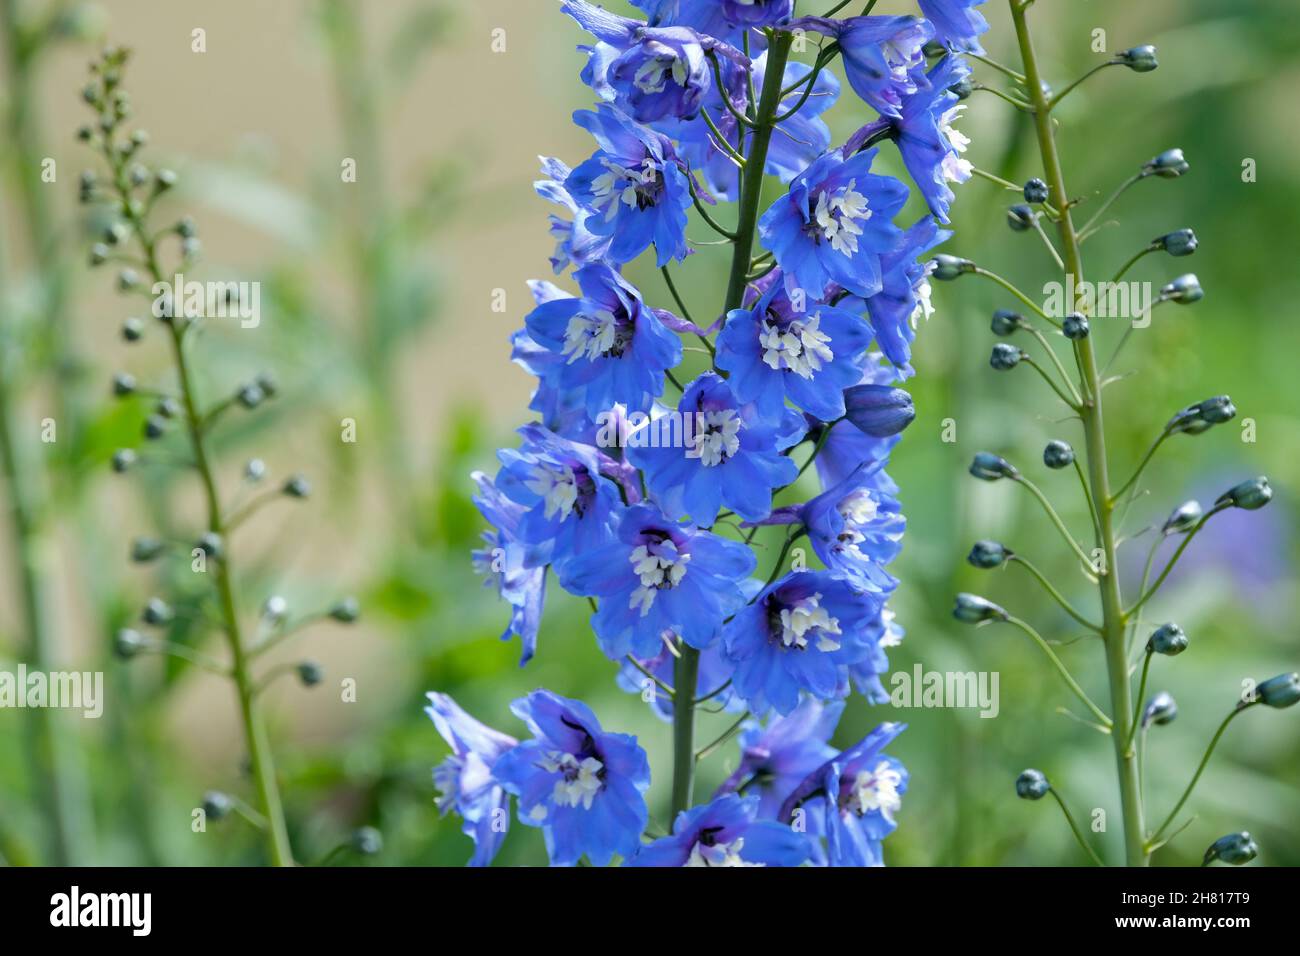 Delphinium Blue Bird Group, Candle Larkspur. Spikes of blue flowers with white central regions. Stock Photo